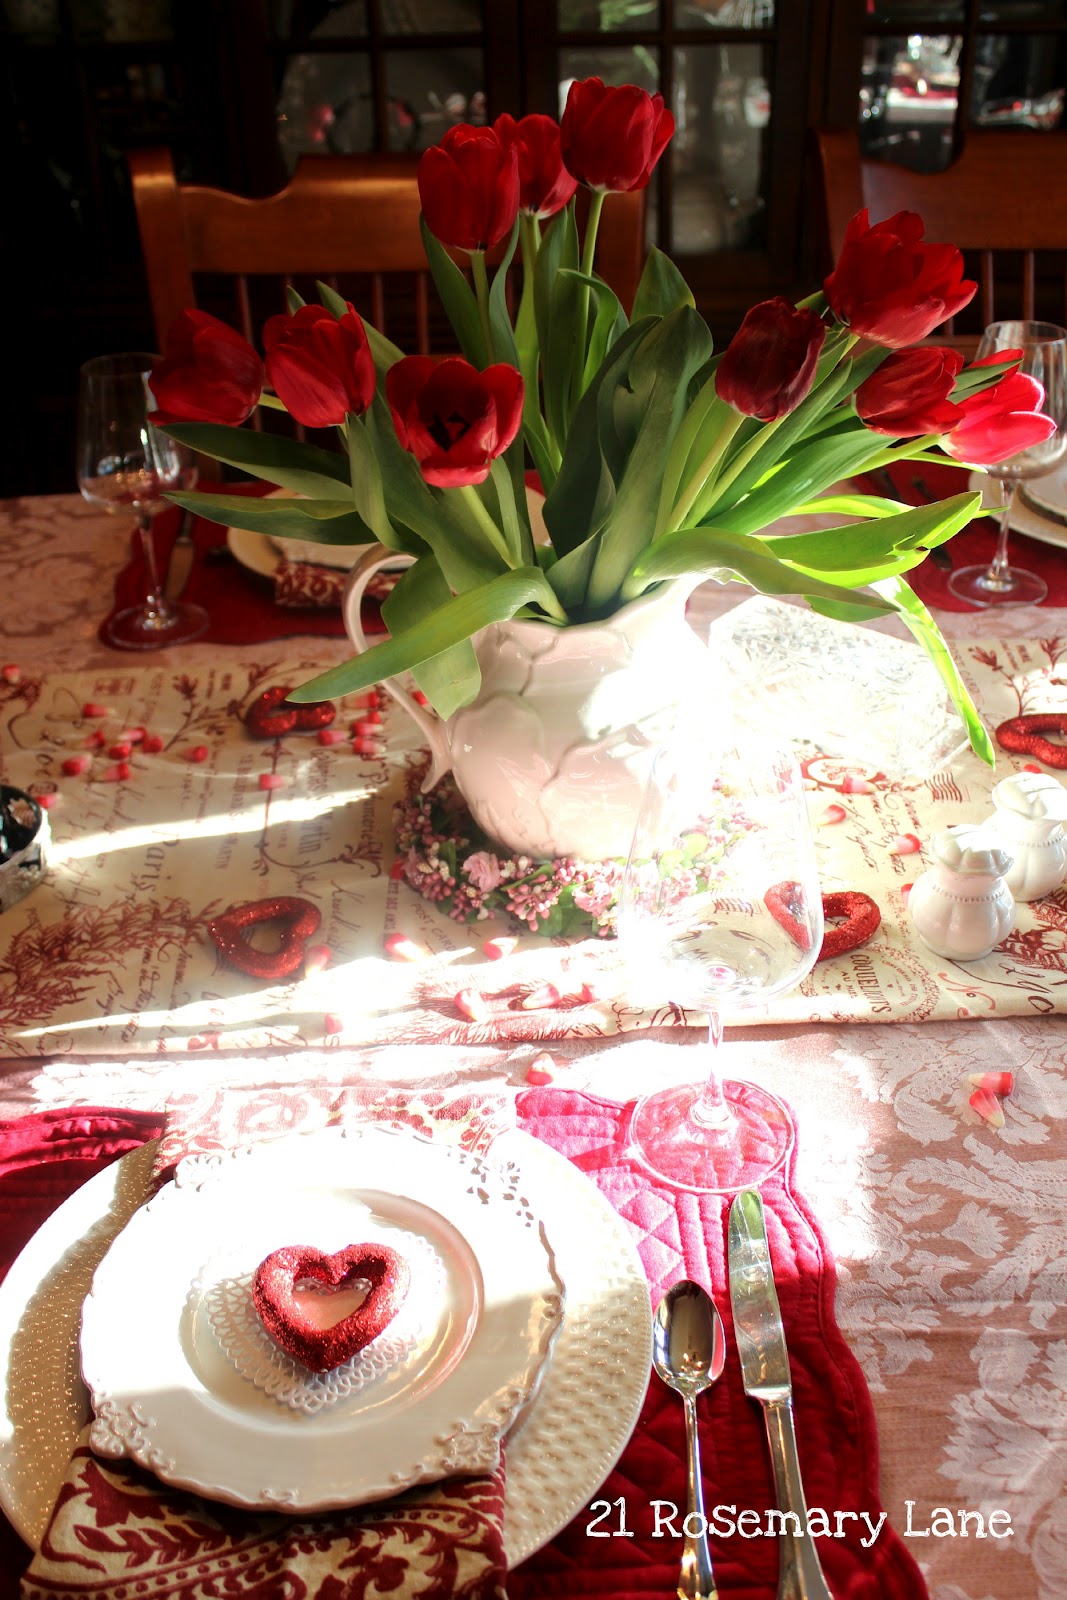 21 Rosemary Lane: St. Valentine's Day Tablescape and Vignette